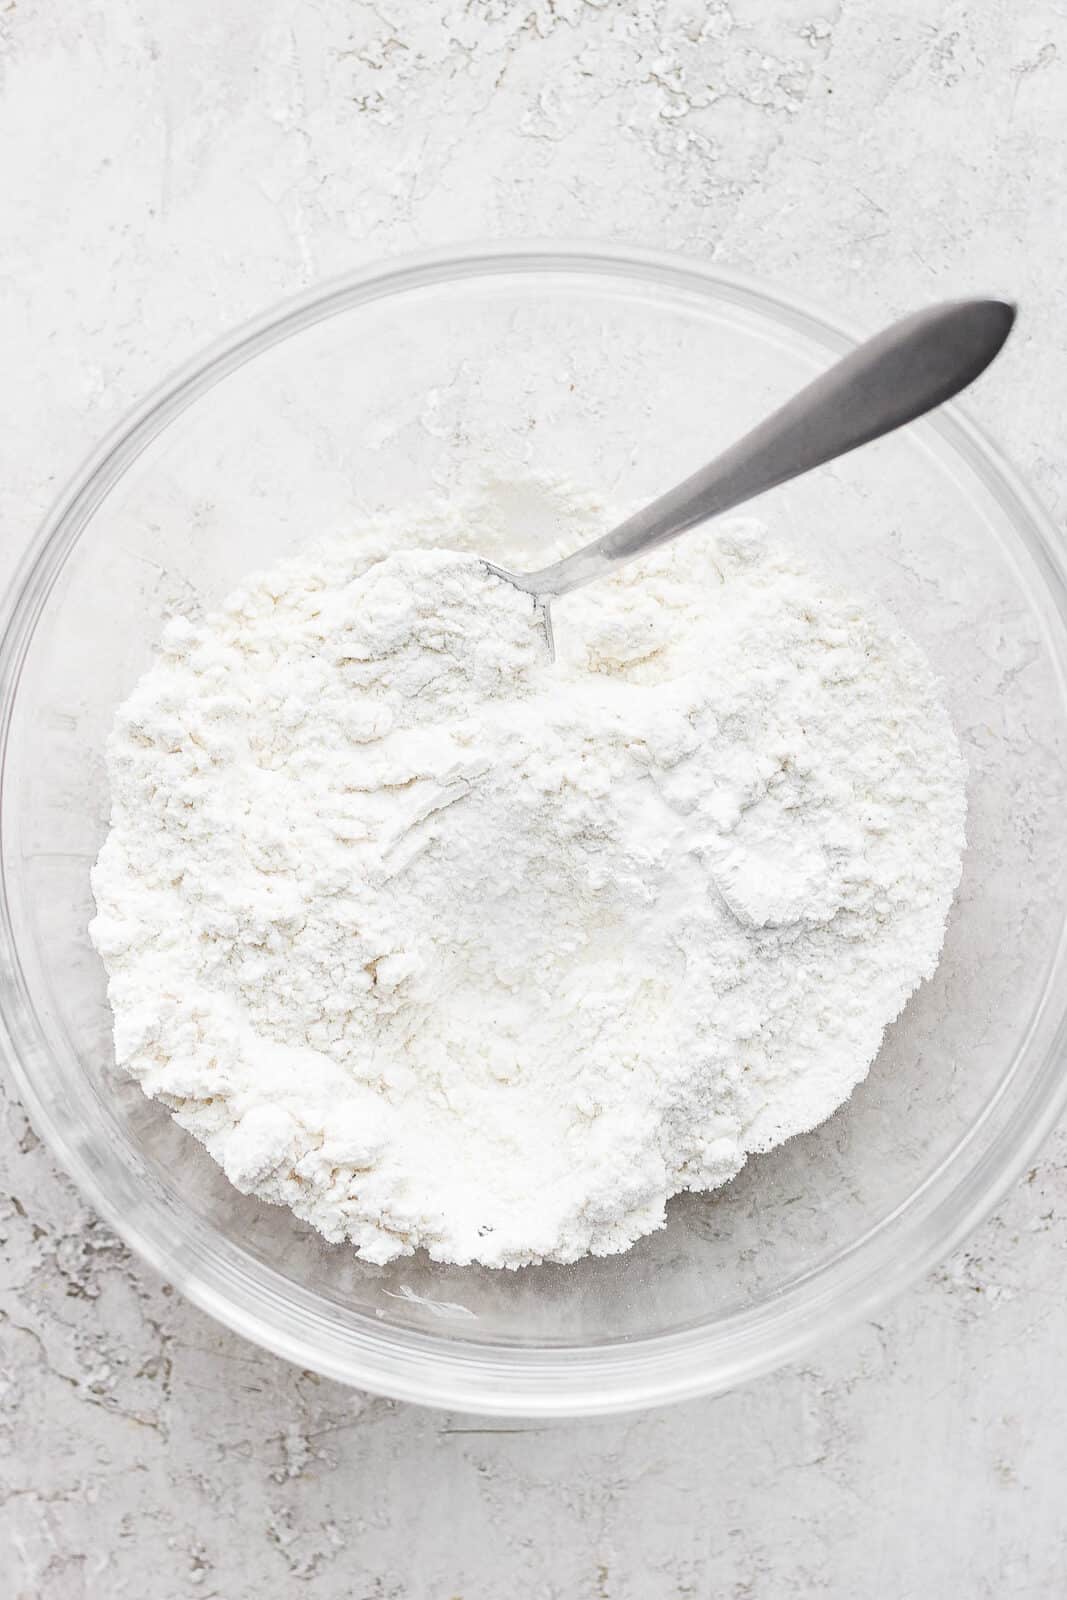 Dry ingredients for gluten free sugar cookies mixed together in a bowl.